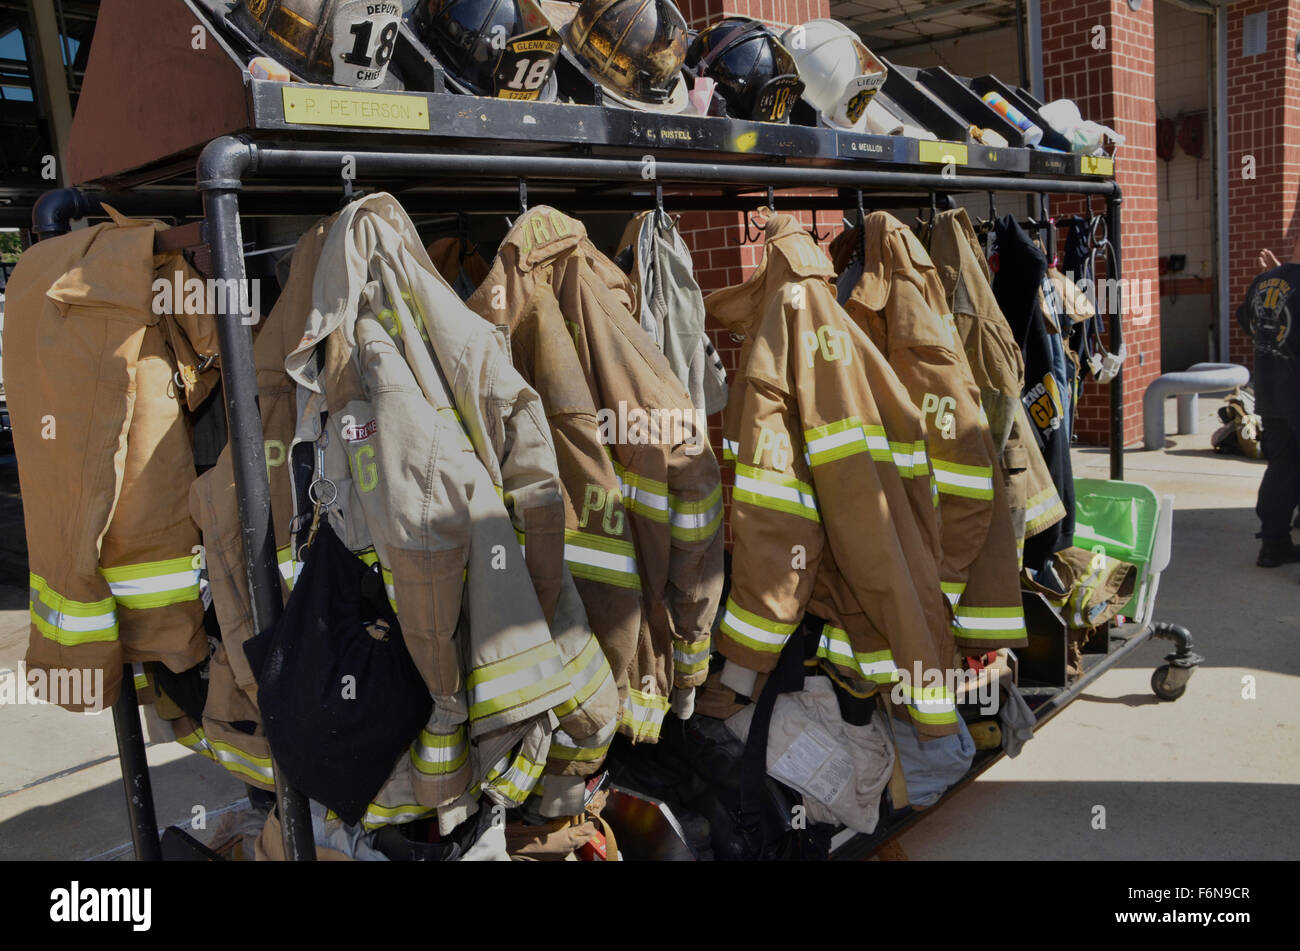 Firefighters running gear hanging on a rack Stock Photo